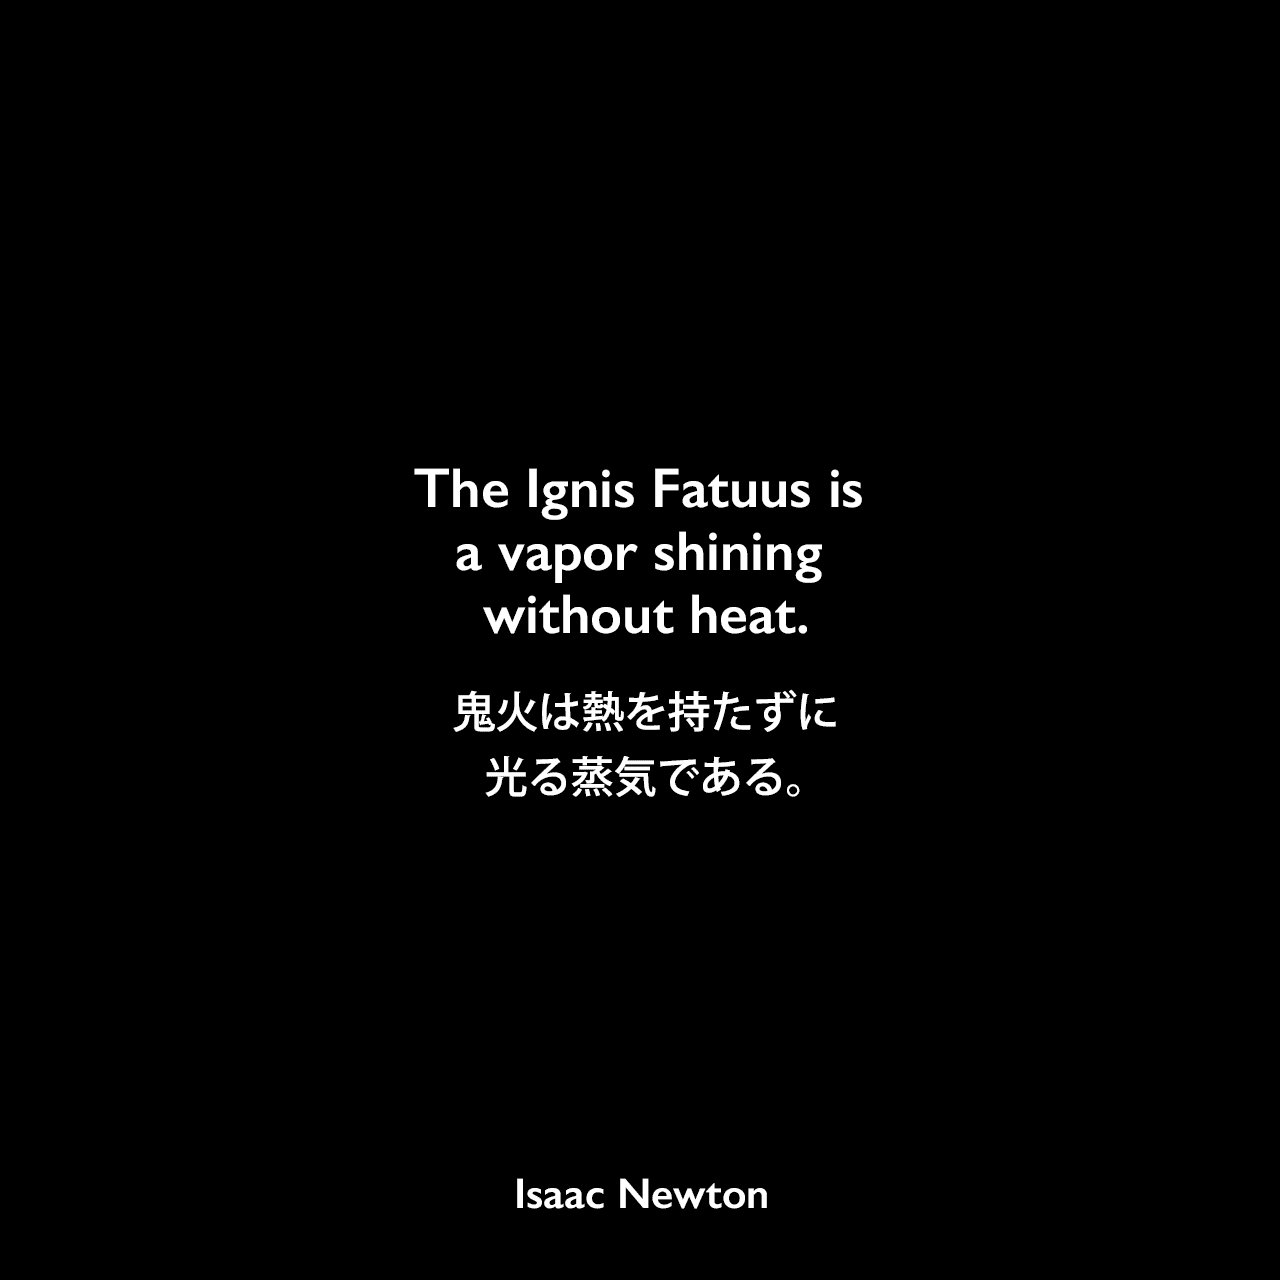 The Ignis Fatuus is a vapor shining without heat.鬼火は熱を持たずに光る蒸気である。Isaac Newton